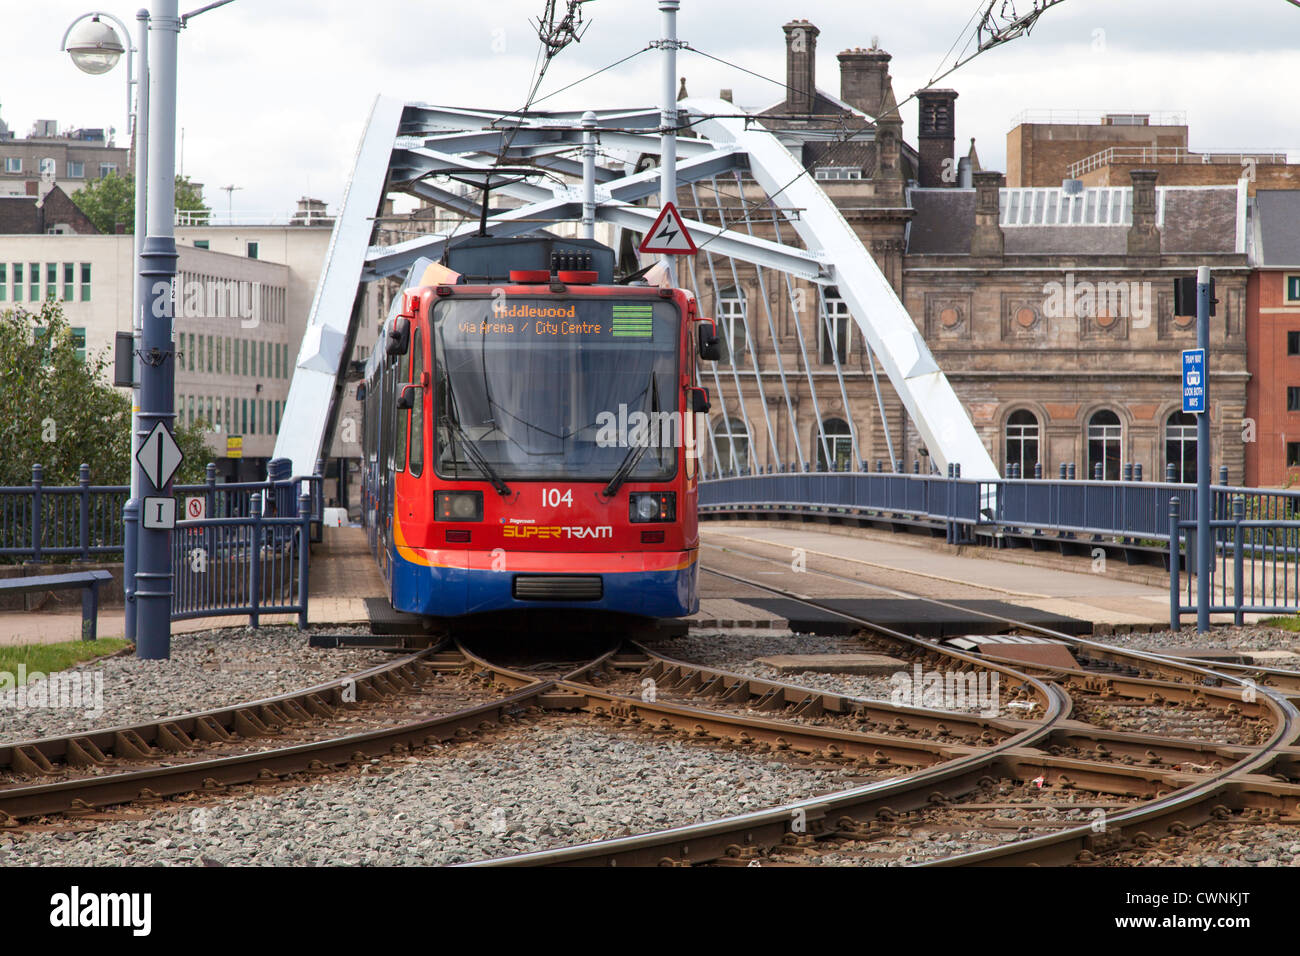 Supertram is a light rail network in Sheffield, Uk operated by Stagecoach. Stock Photo